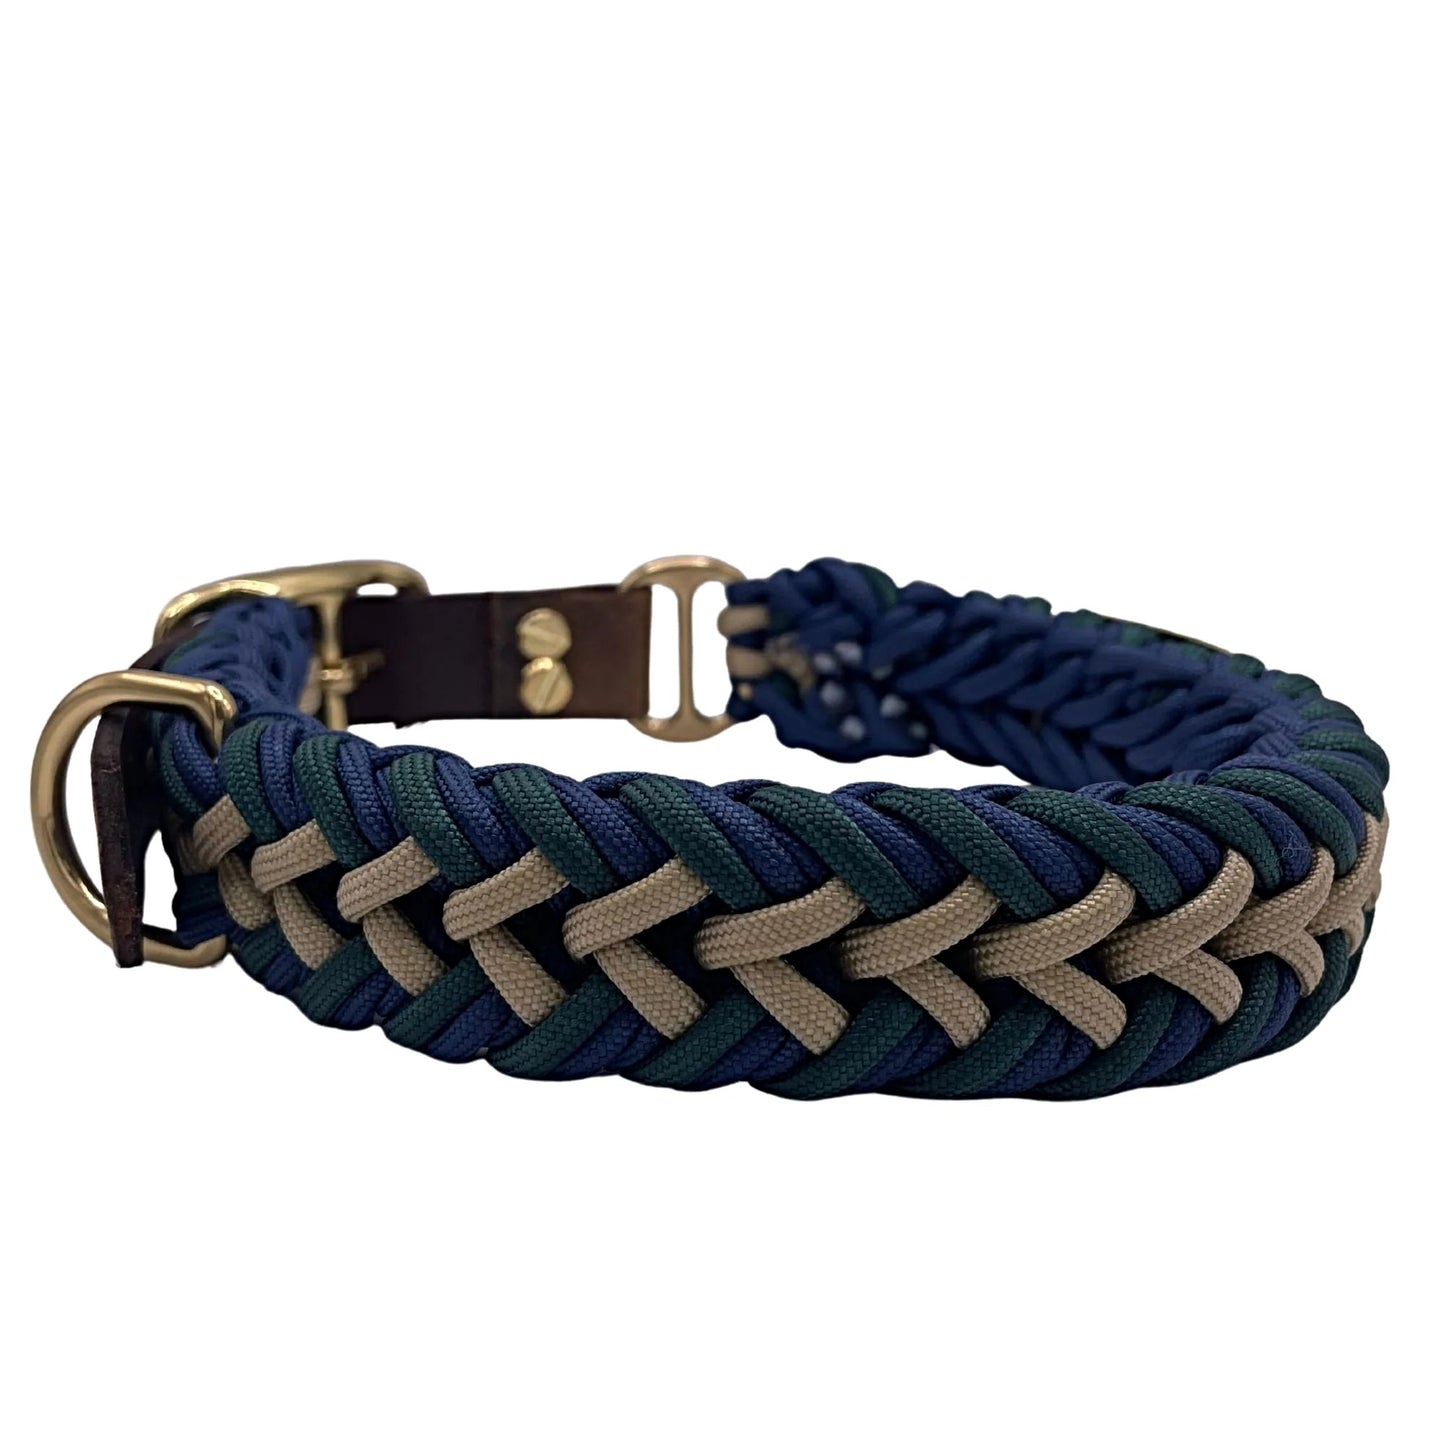 Premium Paracord Dog Collar with Gold hardware and leather or Biothane belt In Navy Blue